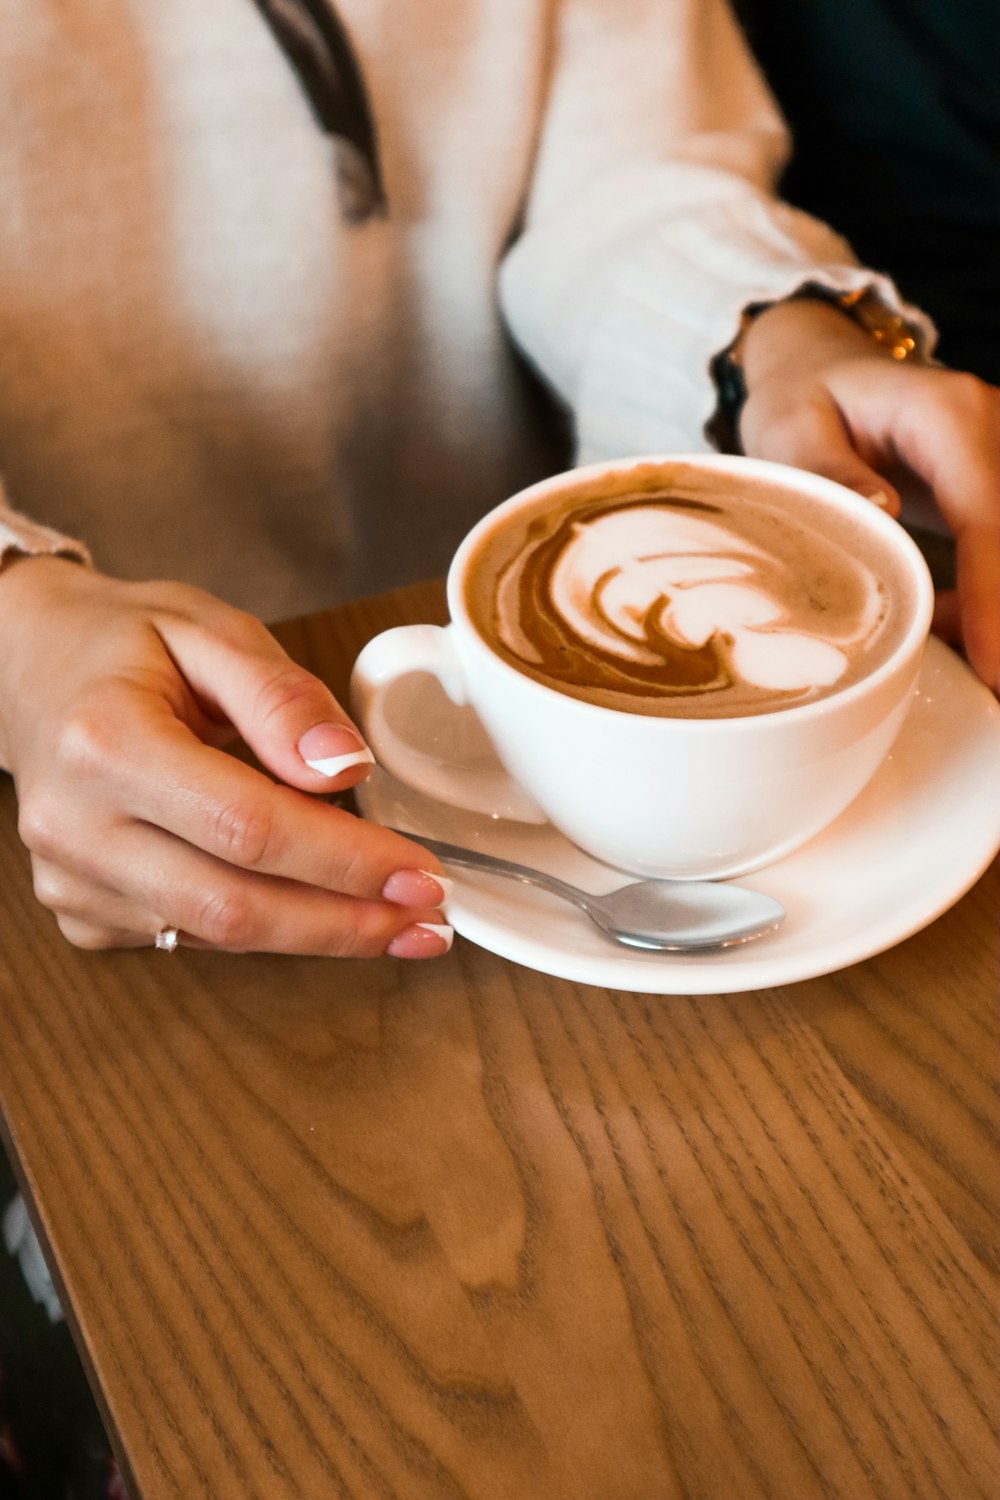 A cup of coffee on a plate photo – Free Drink Image on Unsplash